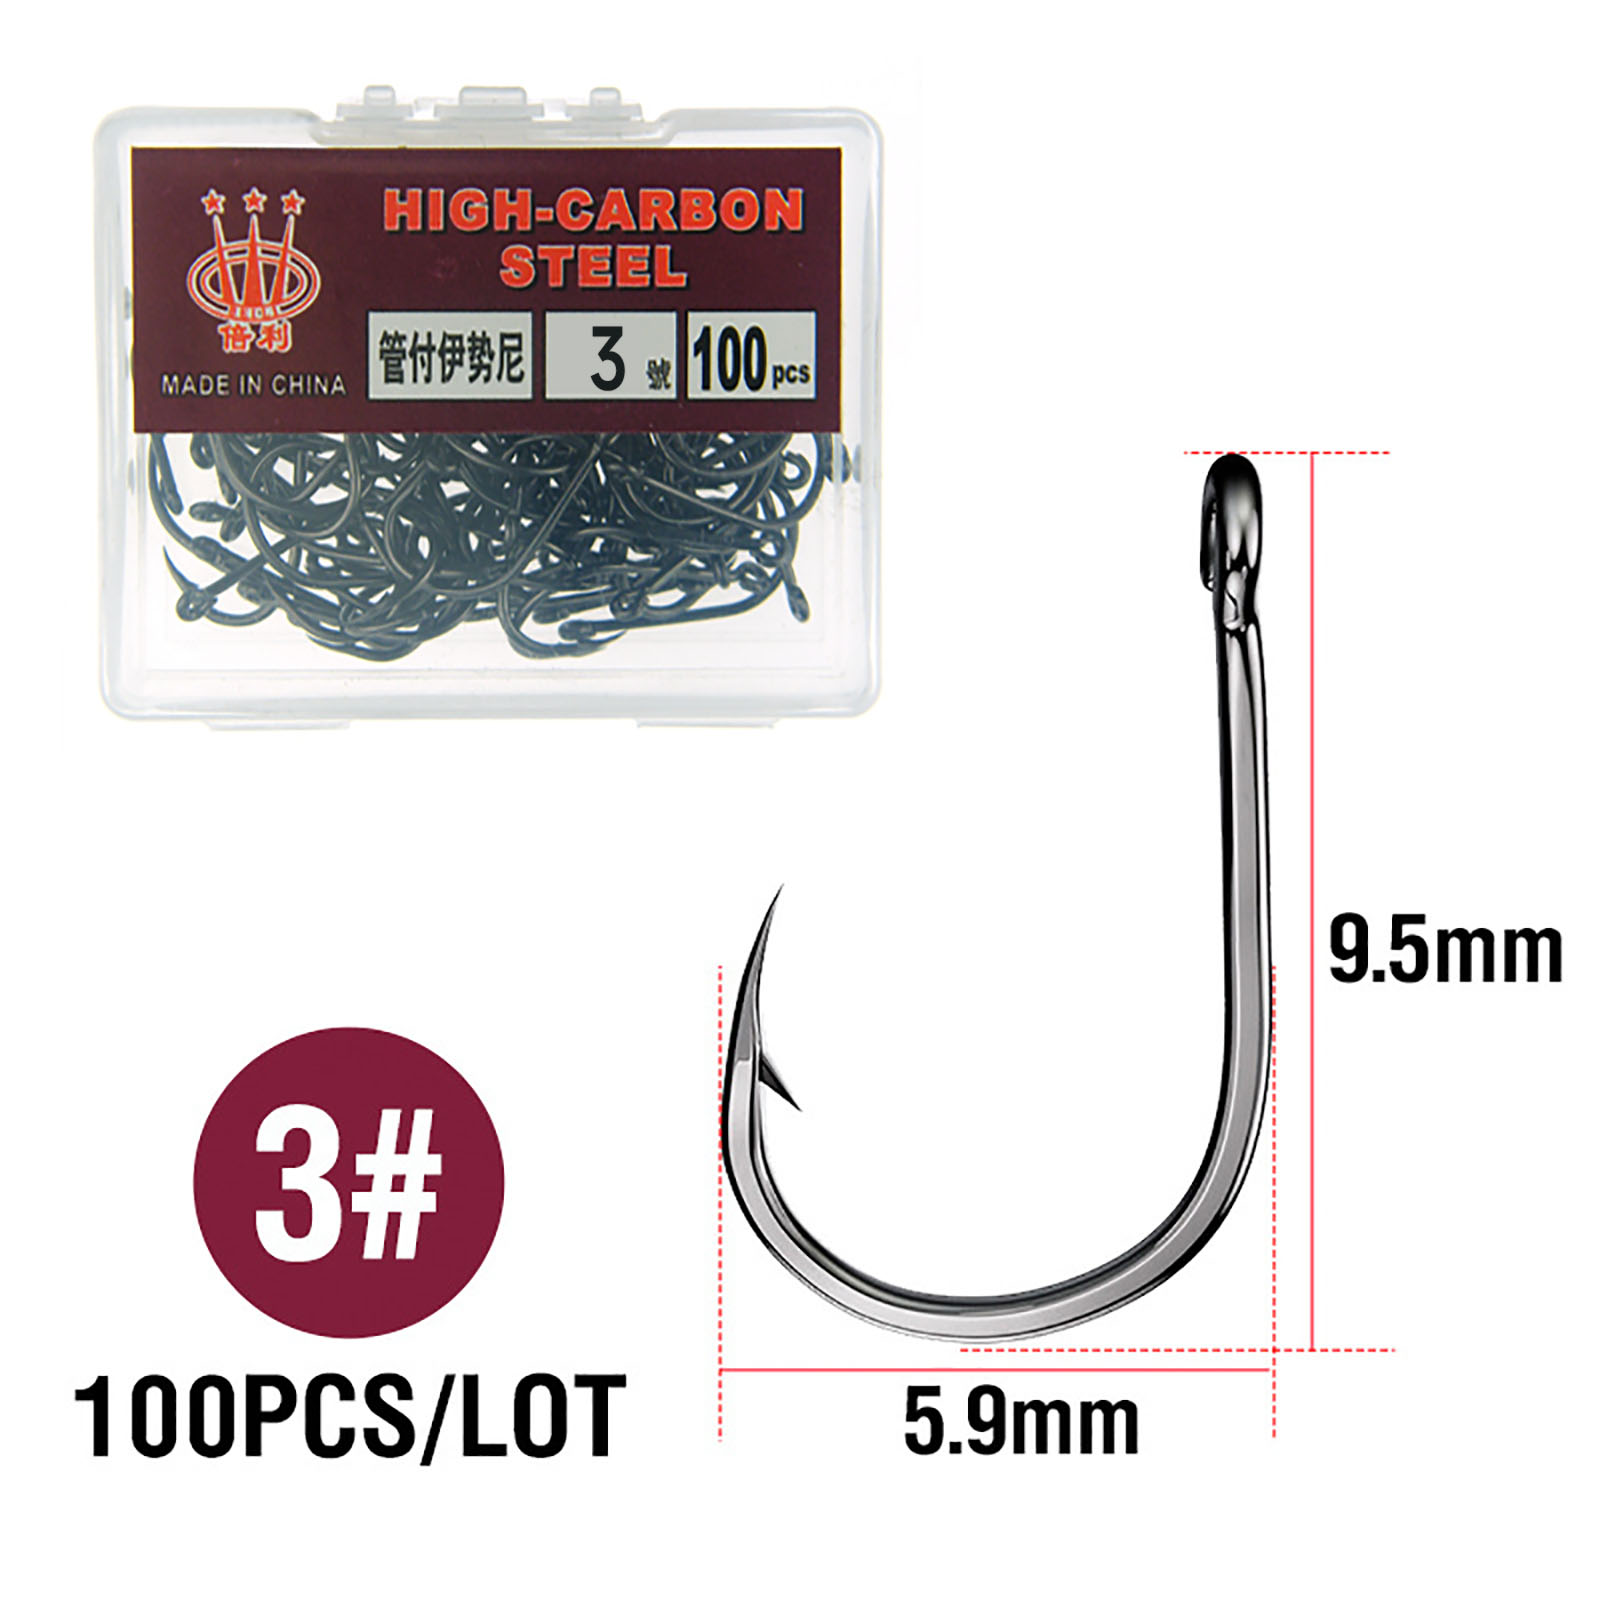 Uxcell 11#0.45 inch Catfish Fishing Jig Hook High Carbon Steel with Barbs, Black 200 Pack, Size: 11.5mm/0.45